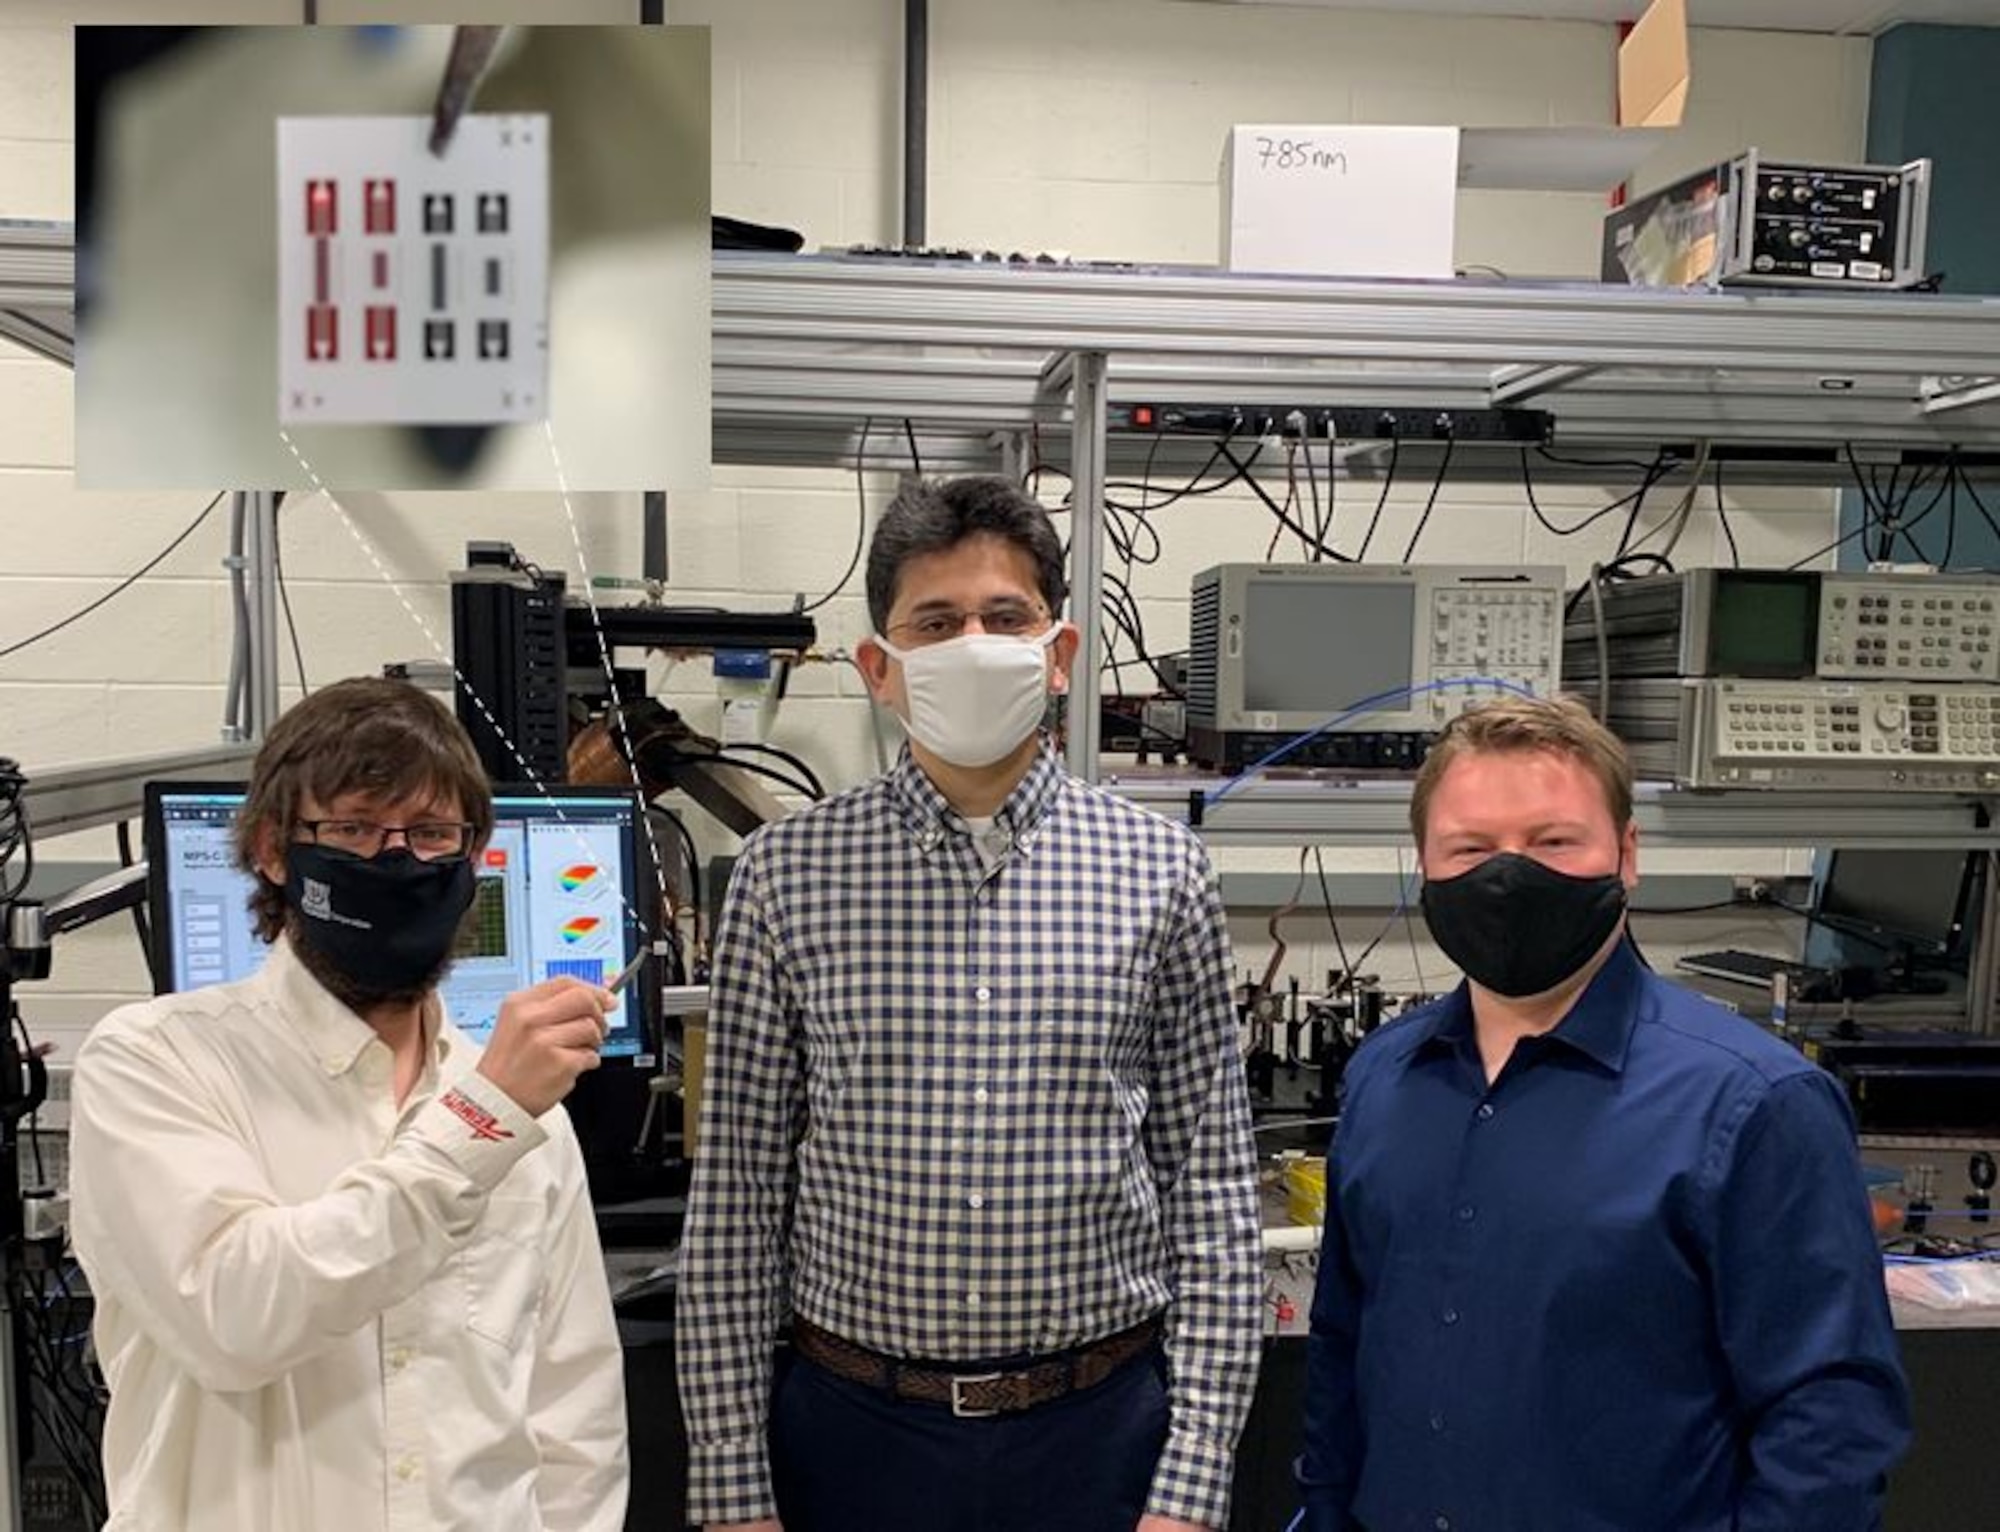 From the left to right, Drs. Derek A. Bas, Piyush J. Shah and Michael R. Page. In the tweezers, Bas is holding a chip that contains an array of four isolators. A state-of the-art commercial RF isolator has a much greater size and weight than the AFRL device. (U.S. Air Force photo/Dr. Michael Wolf)